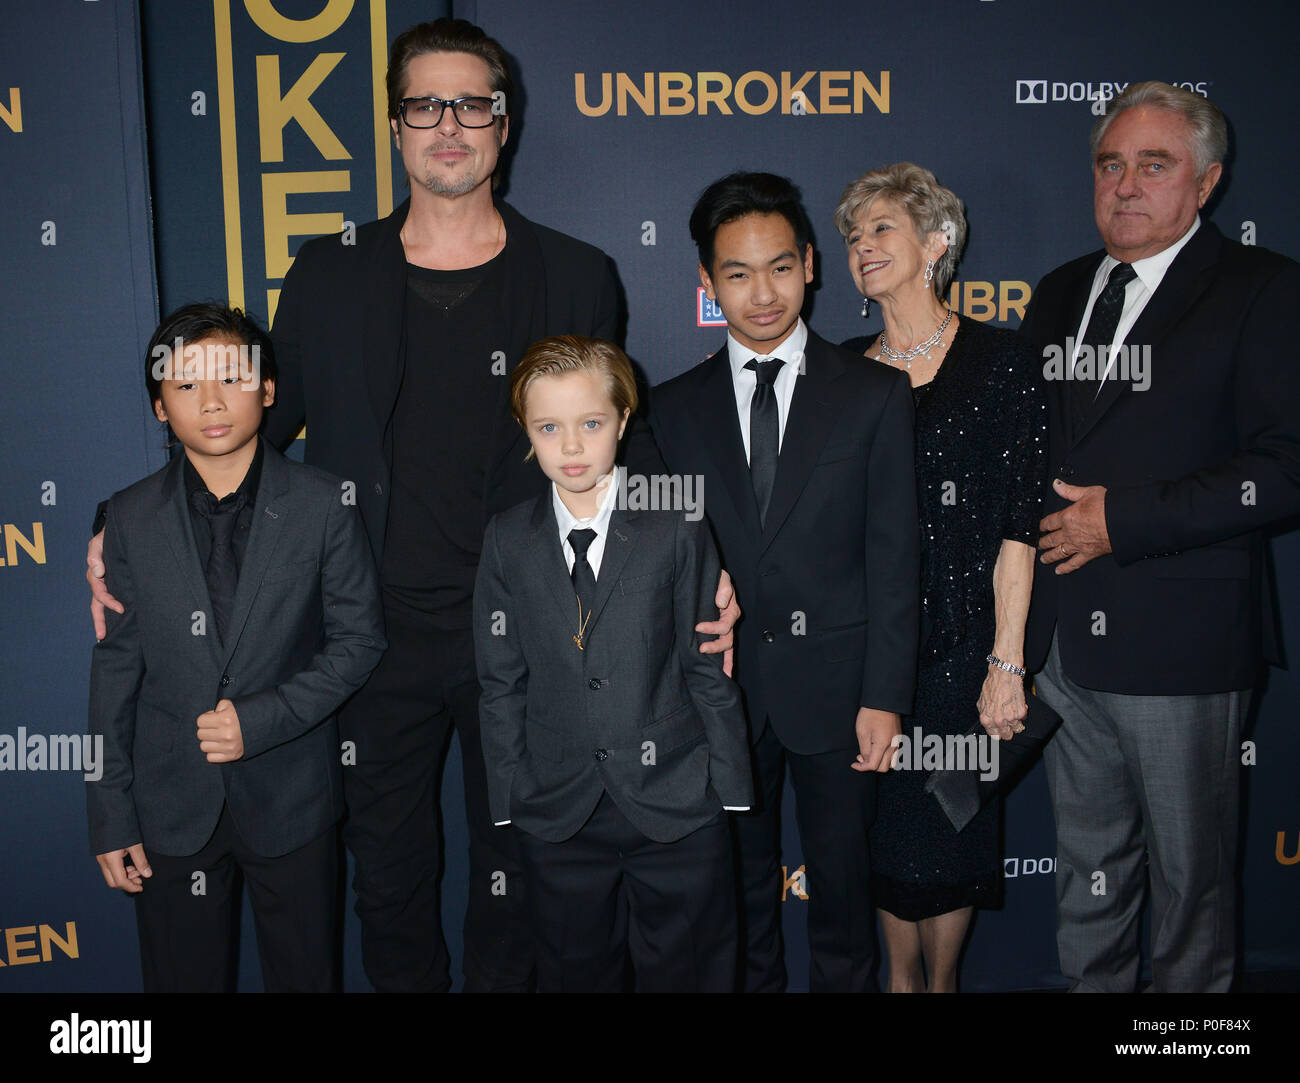 a  Brad Pitt, (L-R) Pax Thien Jolie-Pitt, Shiloh Nouvel Jolie-Pitt,, Maddox Jolie-Pitt, Jane Pitt, and William Pitt 001  at the Unbroken Premiere at the Dolby Theatre in Los Angeles. Dec. 14, 2014a  Brad Pitt, (L-R) Pax Thien Jolie-Pitt, Shiloh Nouvel Jolie-Pitt,, Maddox Jolie-Pitt, Jane Pitt, and William Pitt 001 ------------- Red Carpet Event, Vertical, USA, Film Industry, Celebrities,  Photography, Bestof, Arts Culture and Entertainment, Topix Celebrities fashion /  Vertical, Best of, Event in Hollywood Life - California,  Red Carpet and backstage, USA, Film Industry, Celebrities,  movie ce Stock Photo